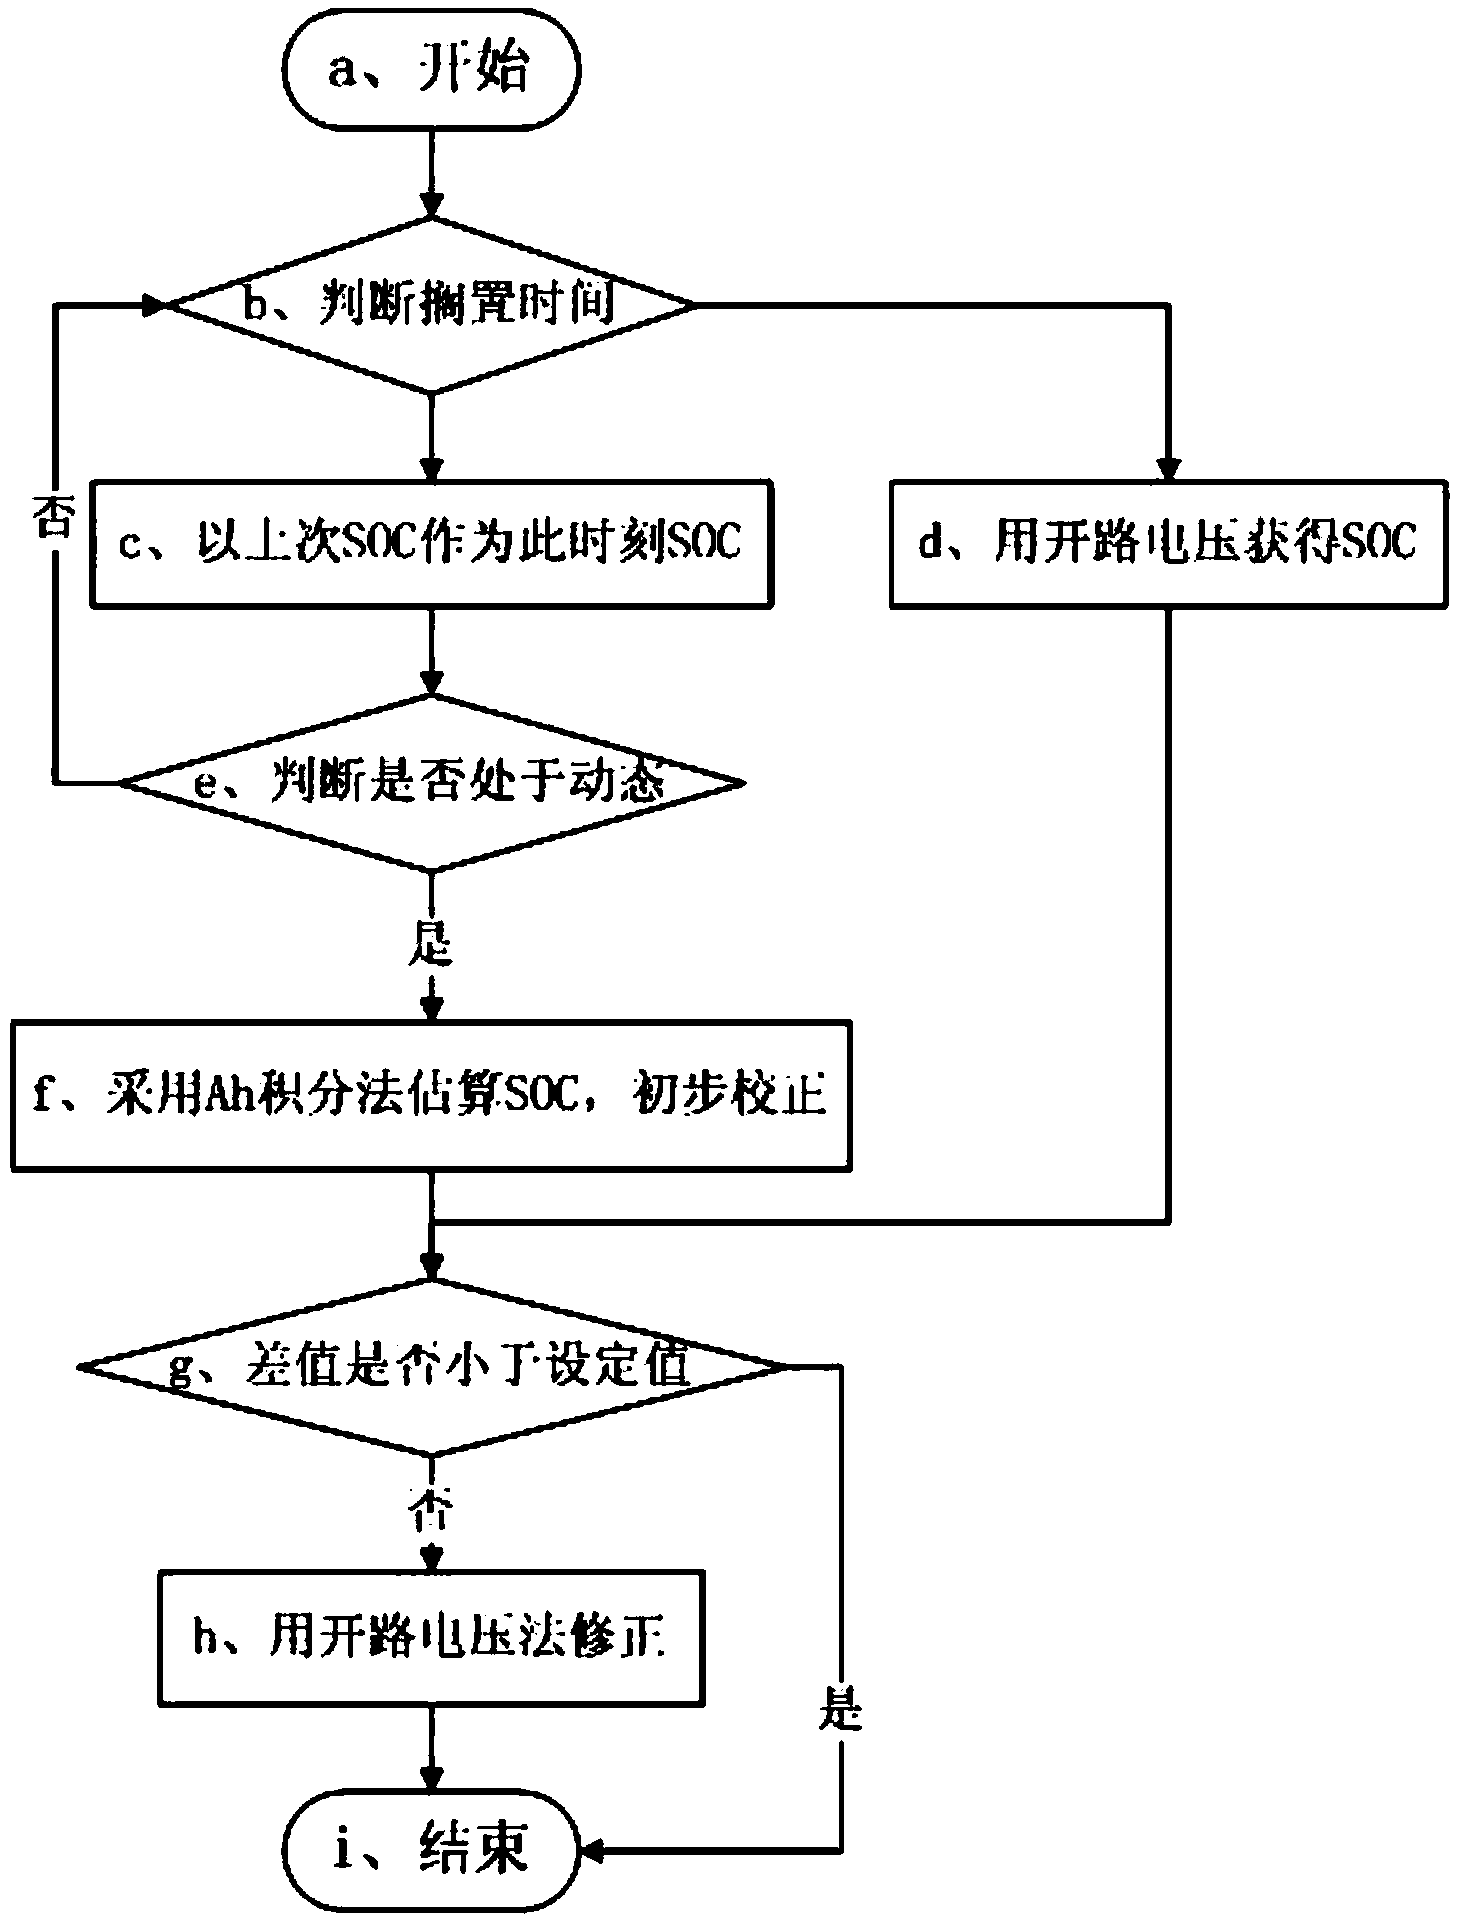 SOC (start of charge) estimation method of automobile power lithium battery